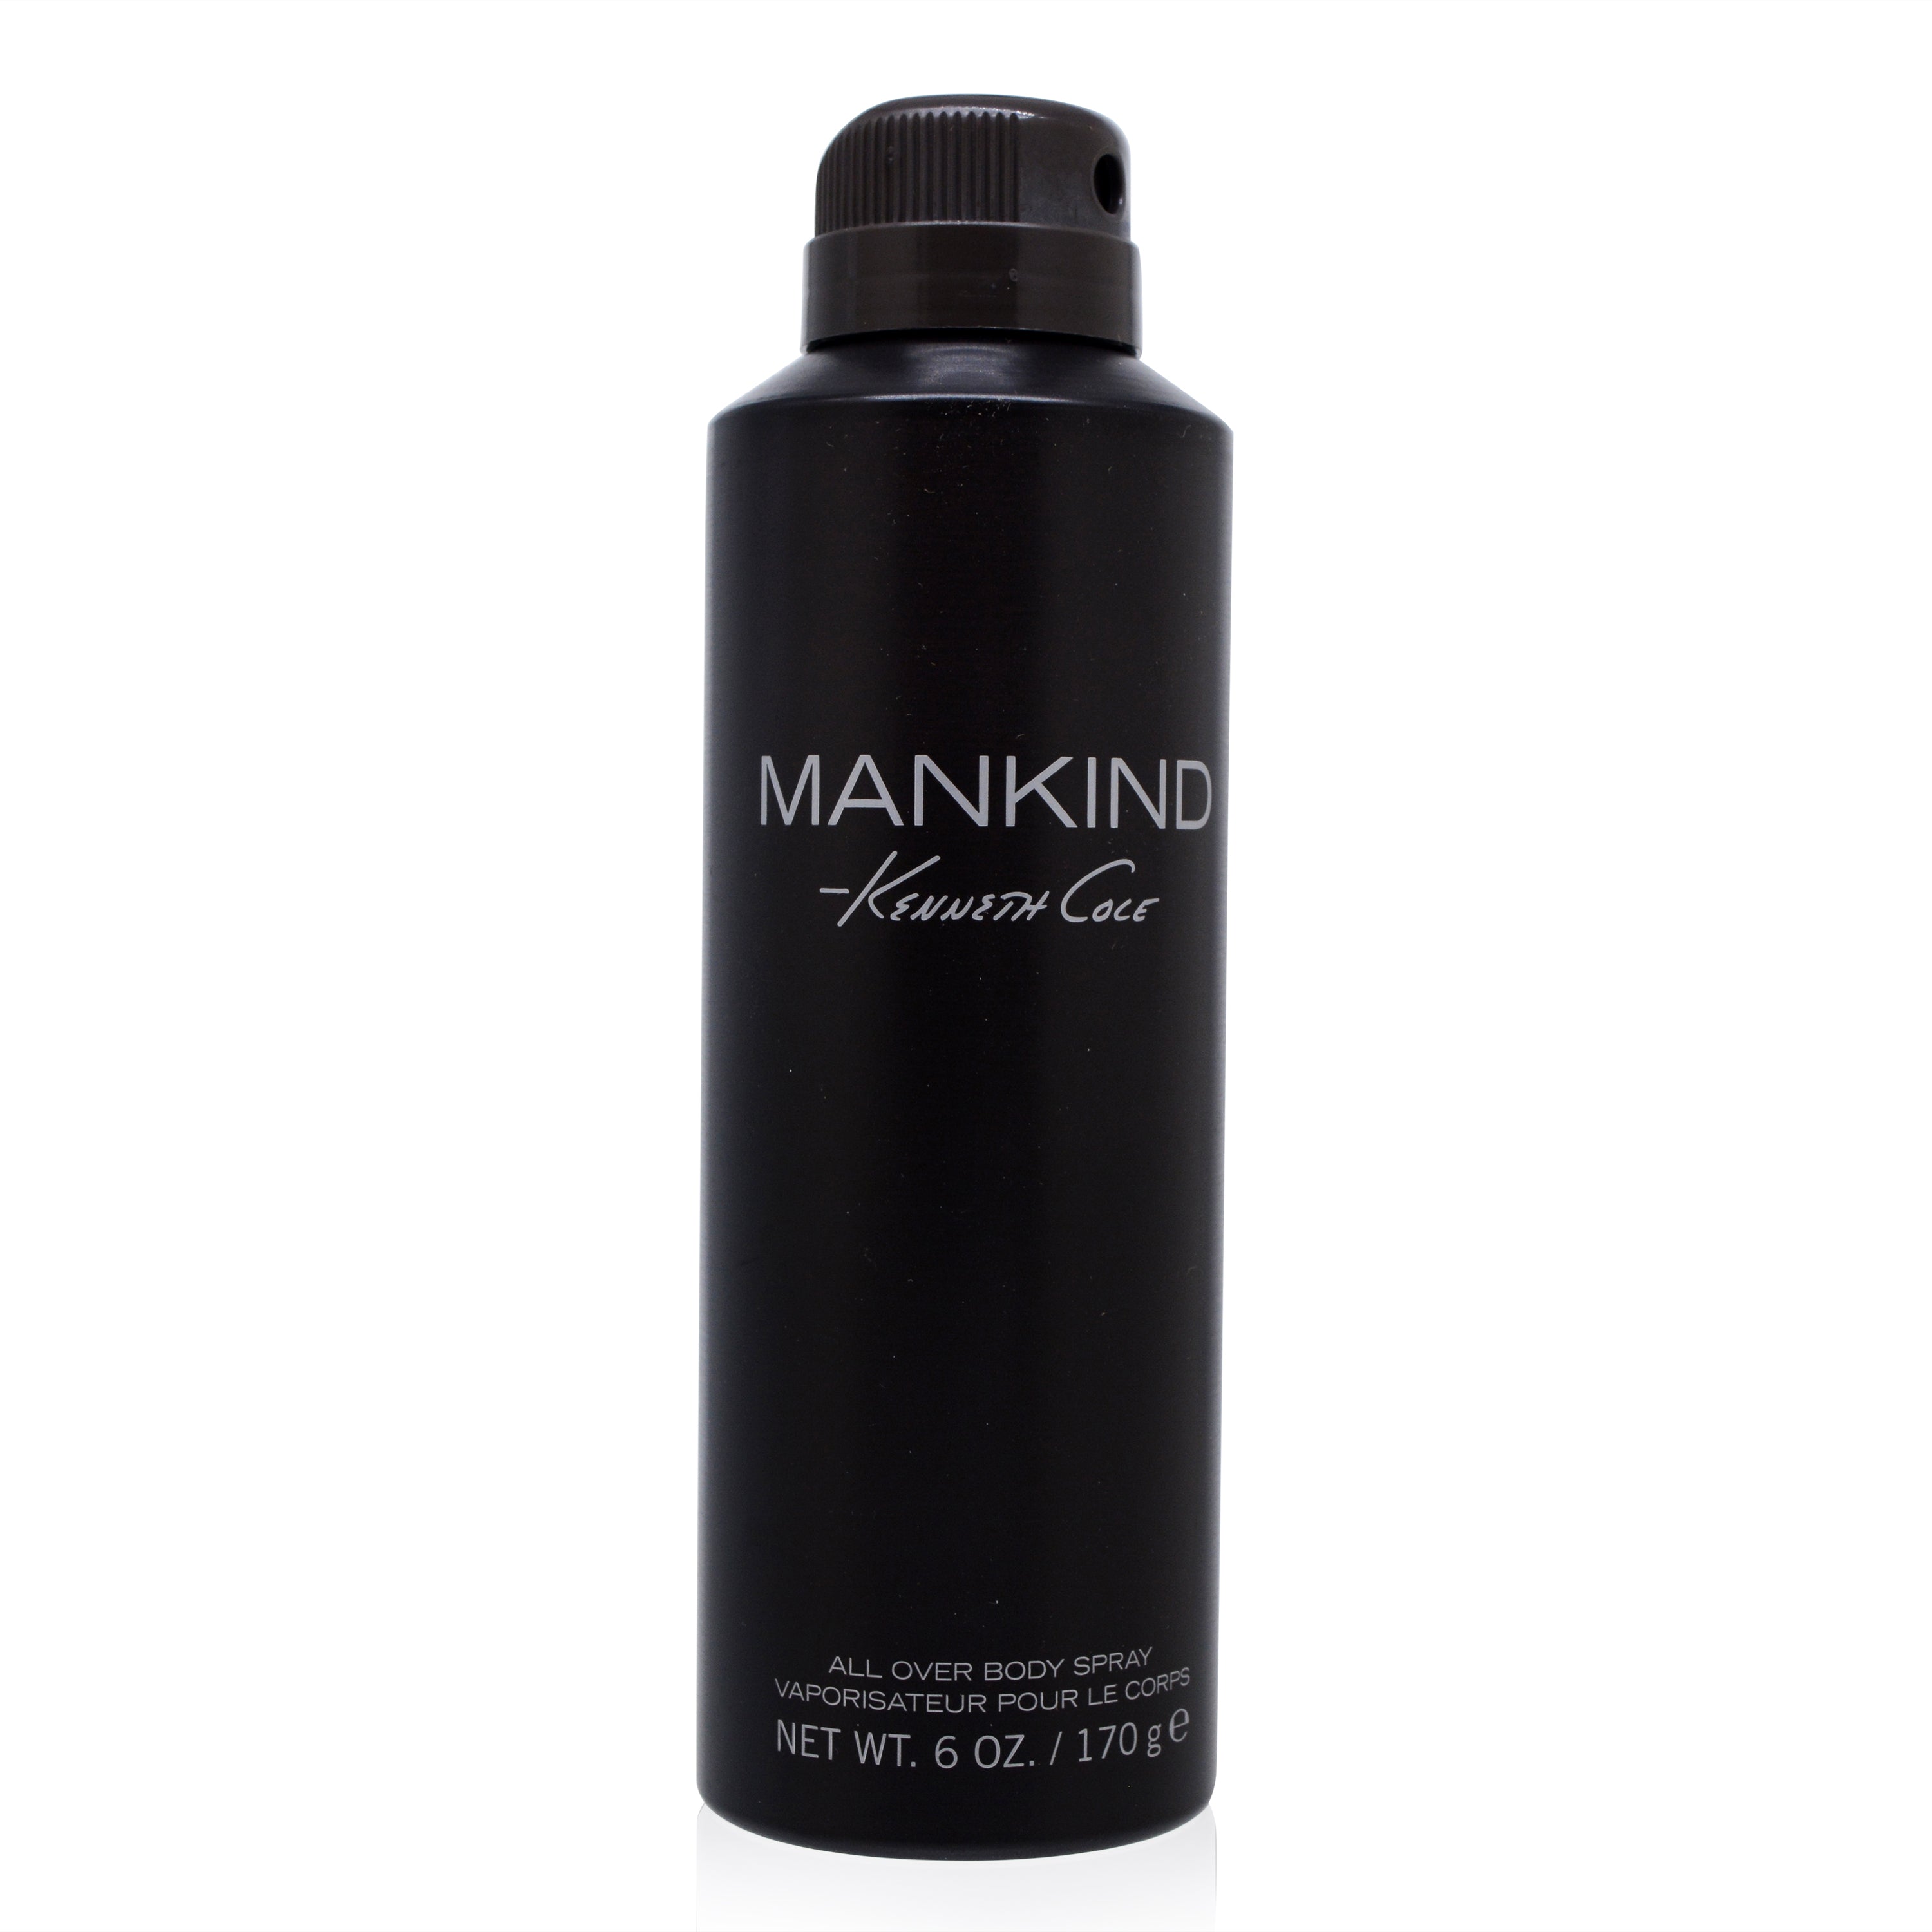 Kenneth Cole Mankind Kenneth Cole All Over Body Spray